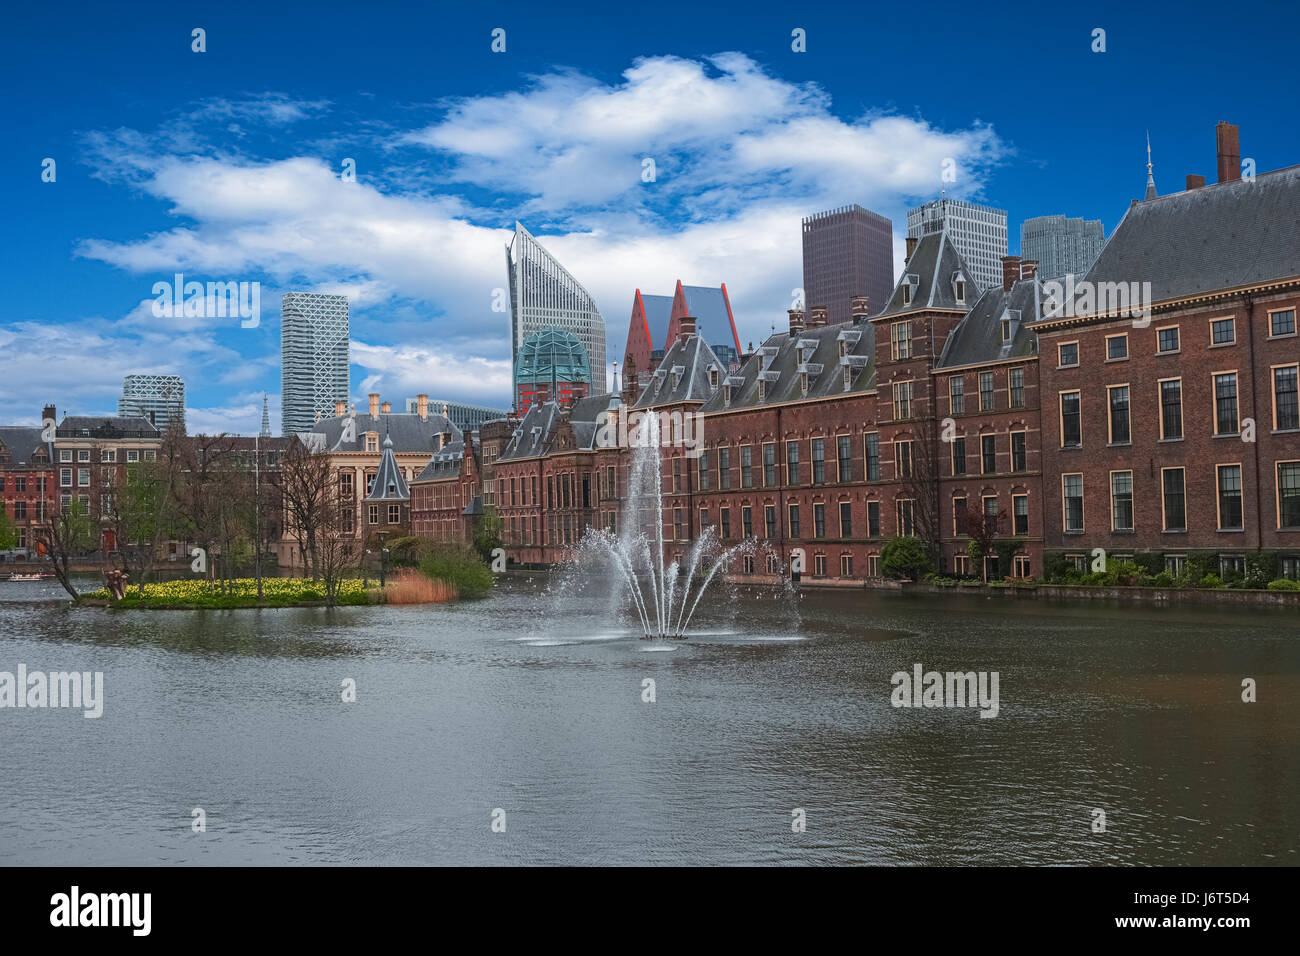 City center of The Hague, Netherlands, Europe. Binnenhof palace in Den Haag. The Dutch Parliament and Hofvijer Pond. Cityscape of The Hague. Skyline,  Stock Photo